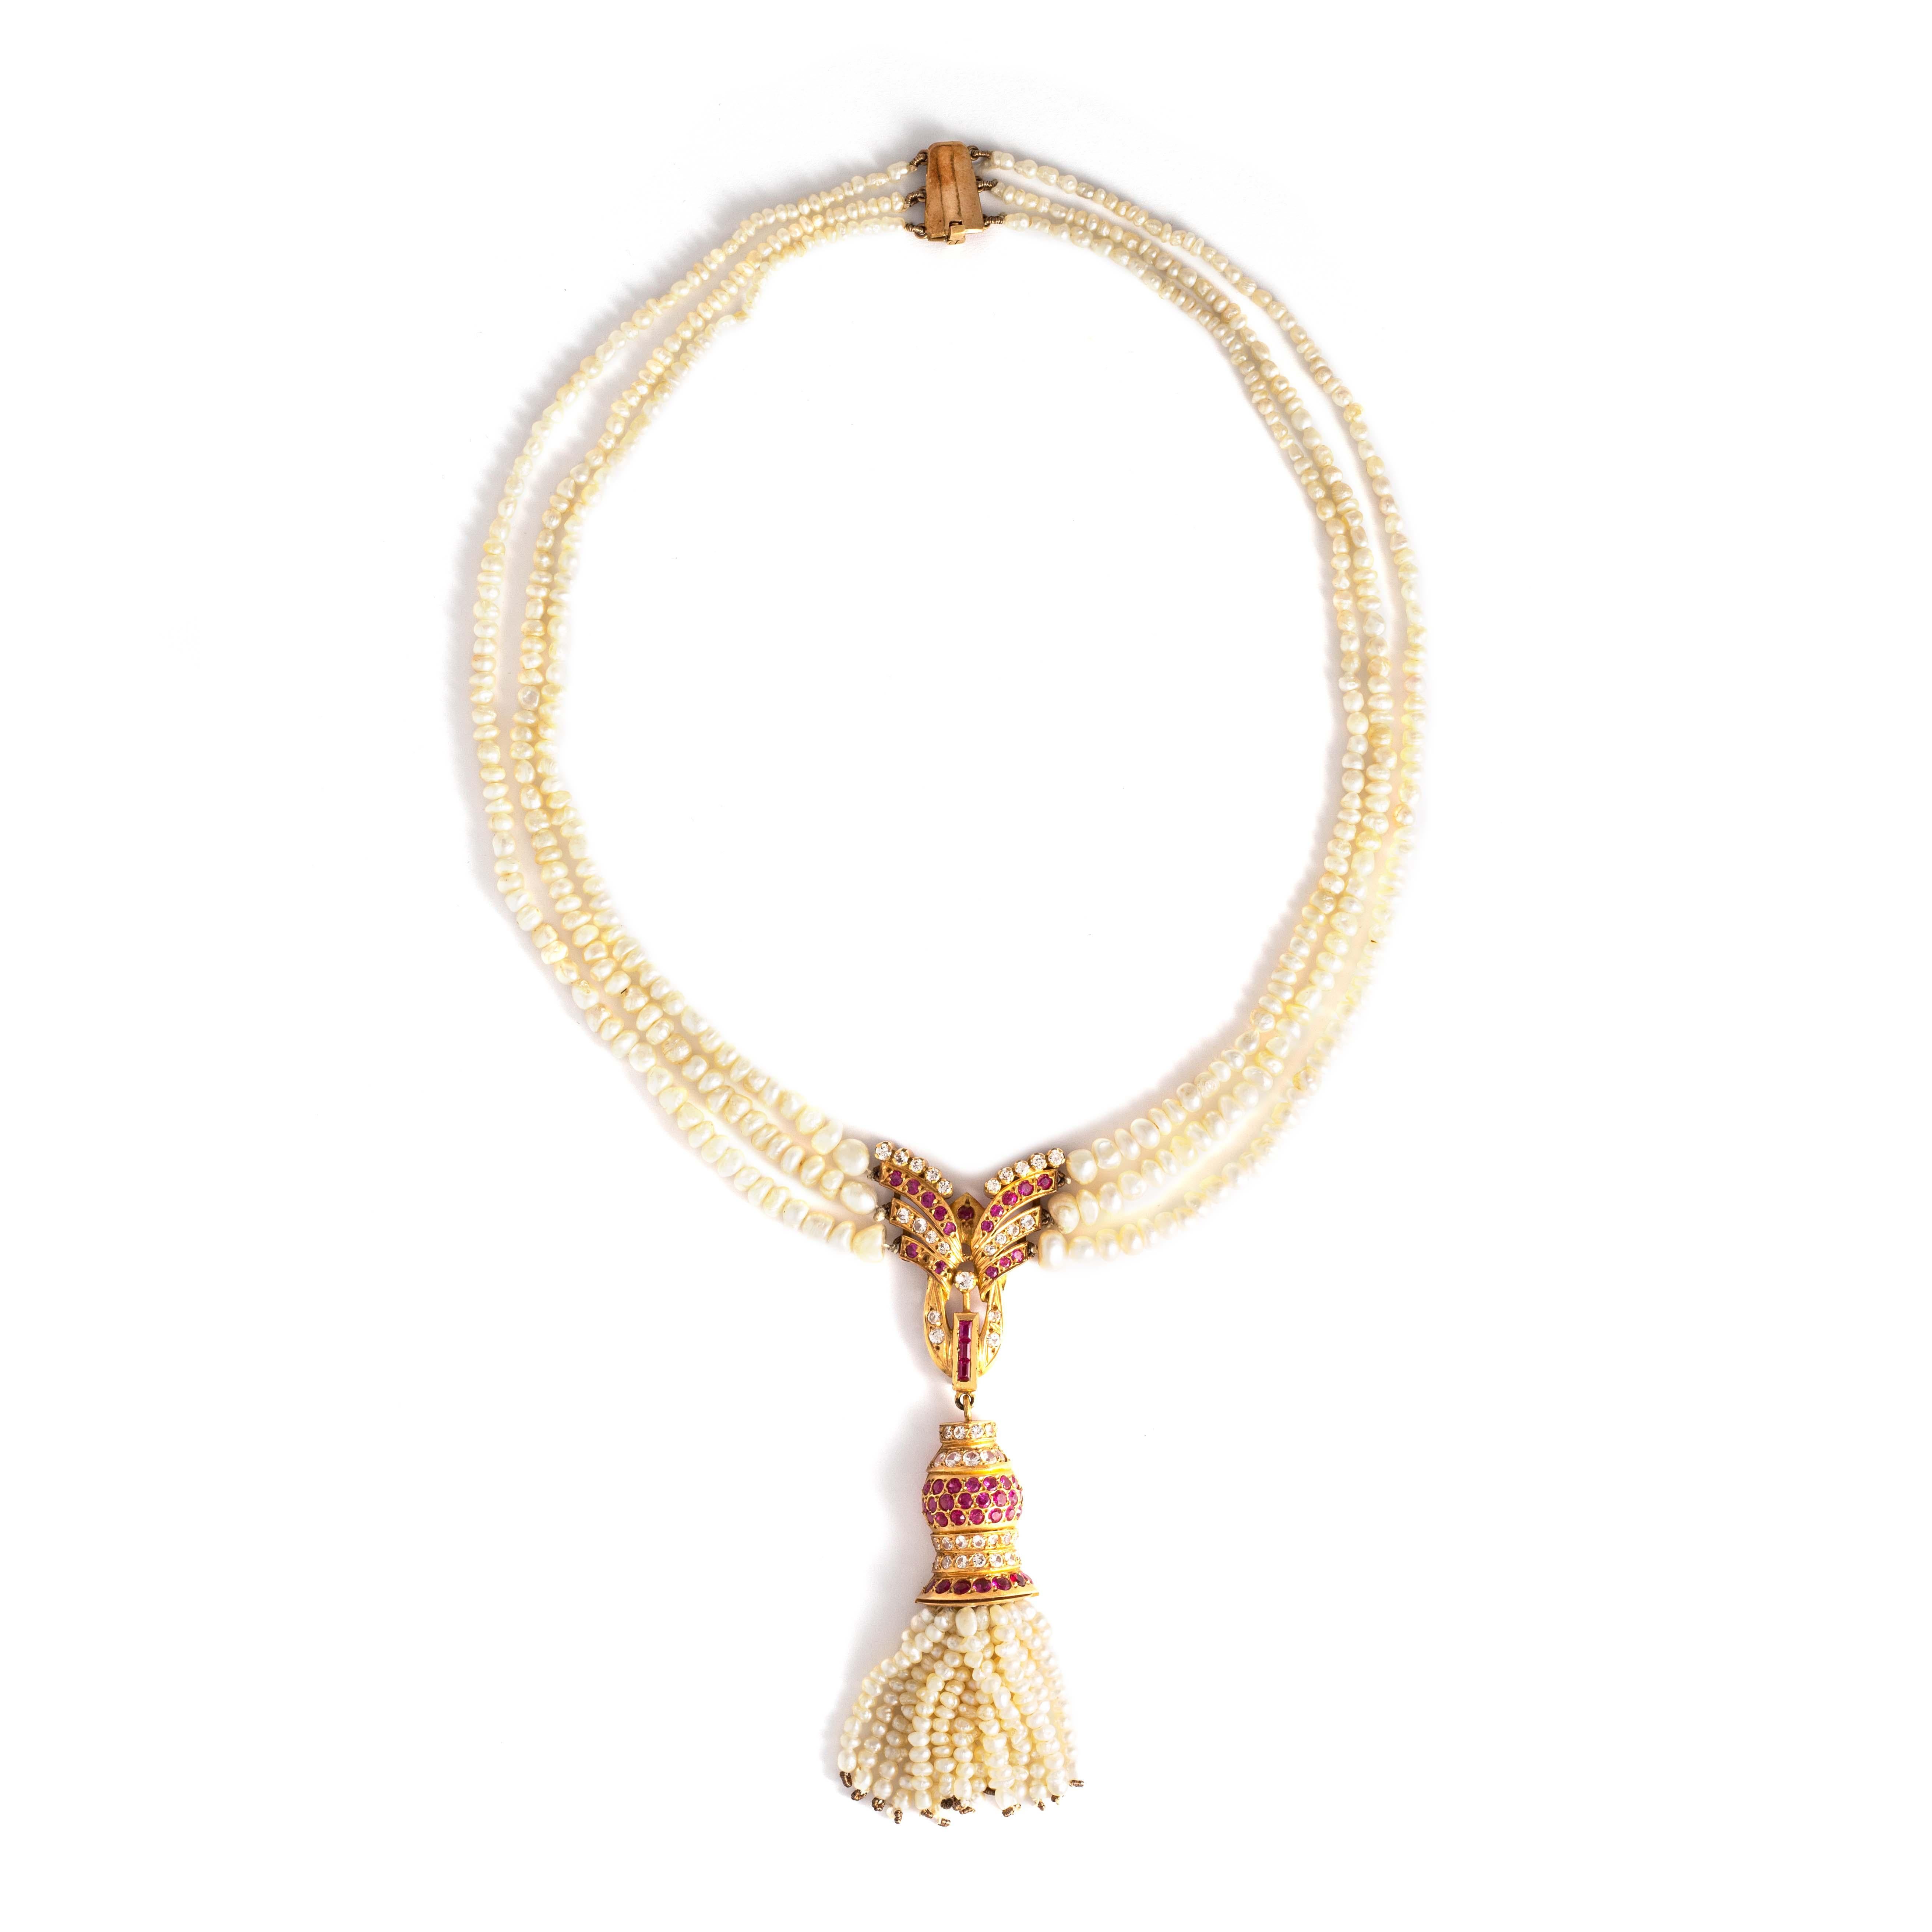 Indian Style Gold Pearl Necklace.
Necklace composed by cultured pearls holding a 14K yellow gold center motif set with round-cut white and red stones.
Length of the necklace: 43.50 centimeters. 
Length of the center motif: 10.00 centimeters.